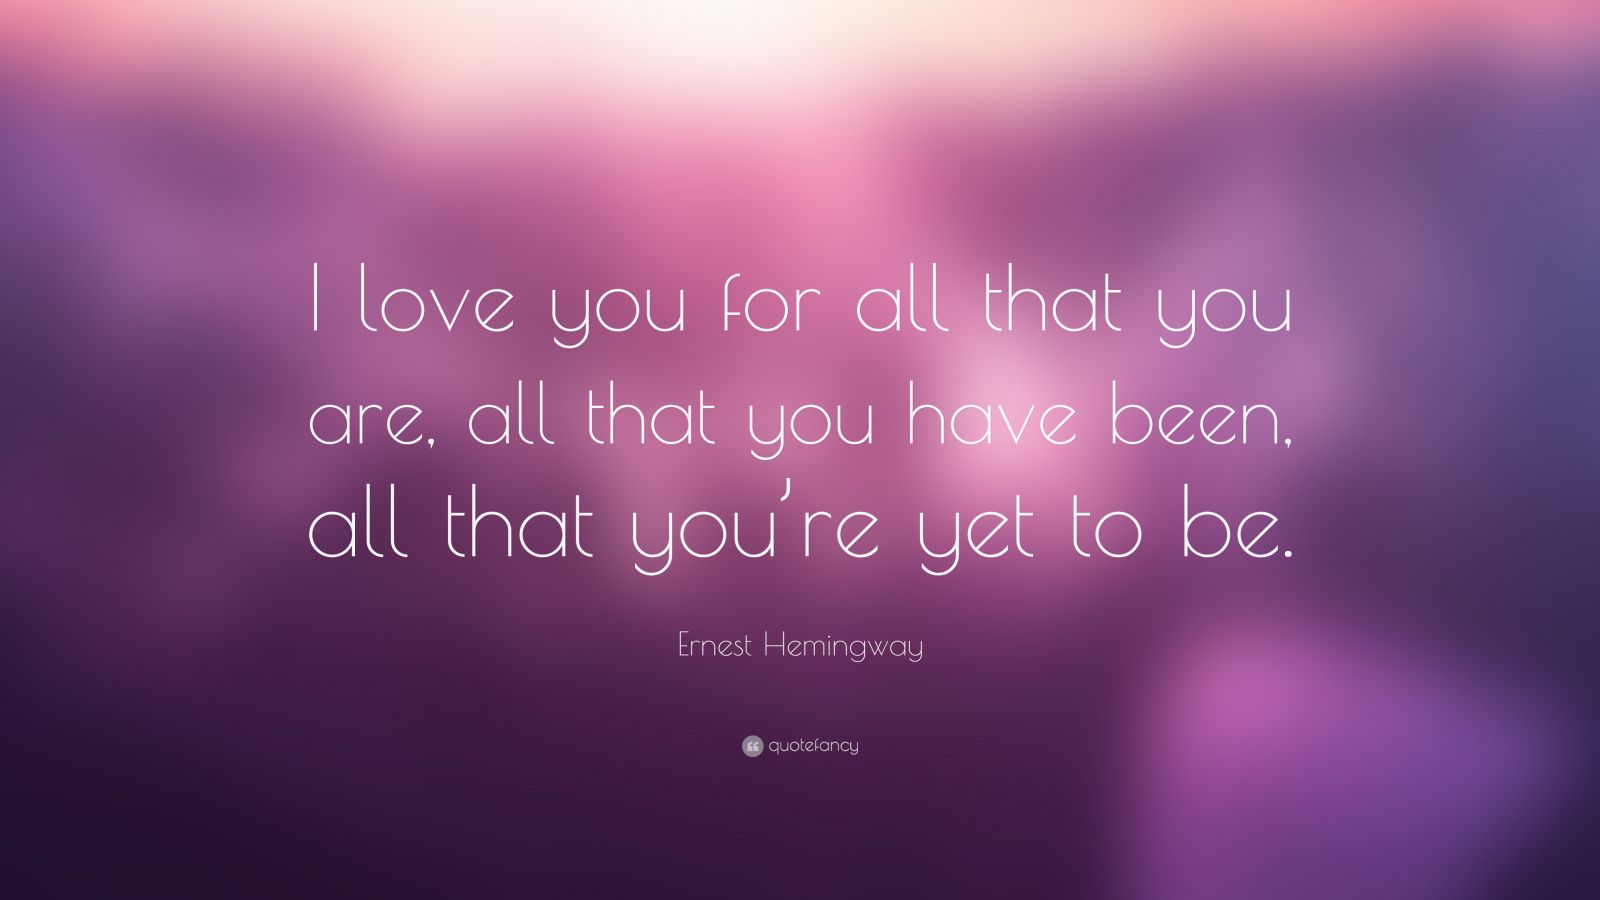 Ernest Hemingway Quote: “I love you for all that you are, all that you